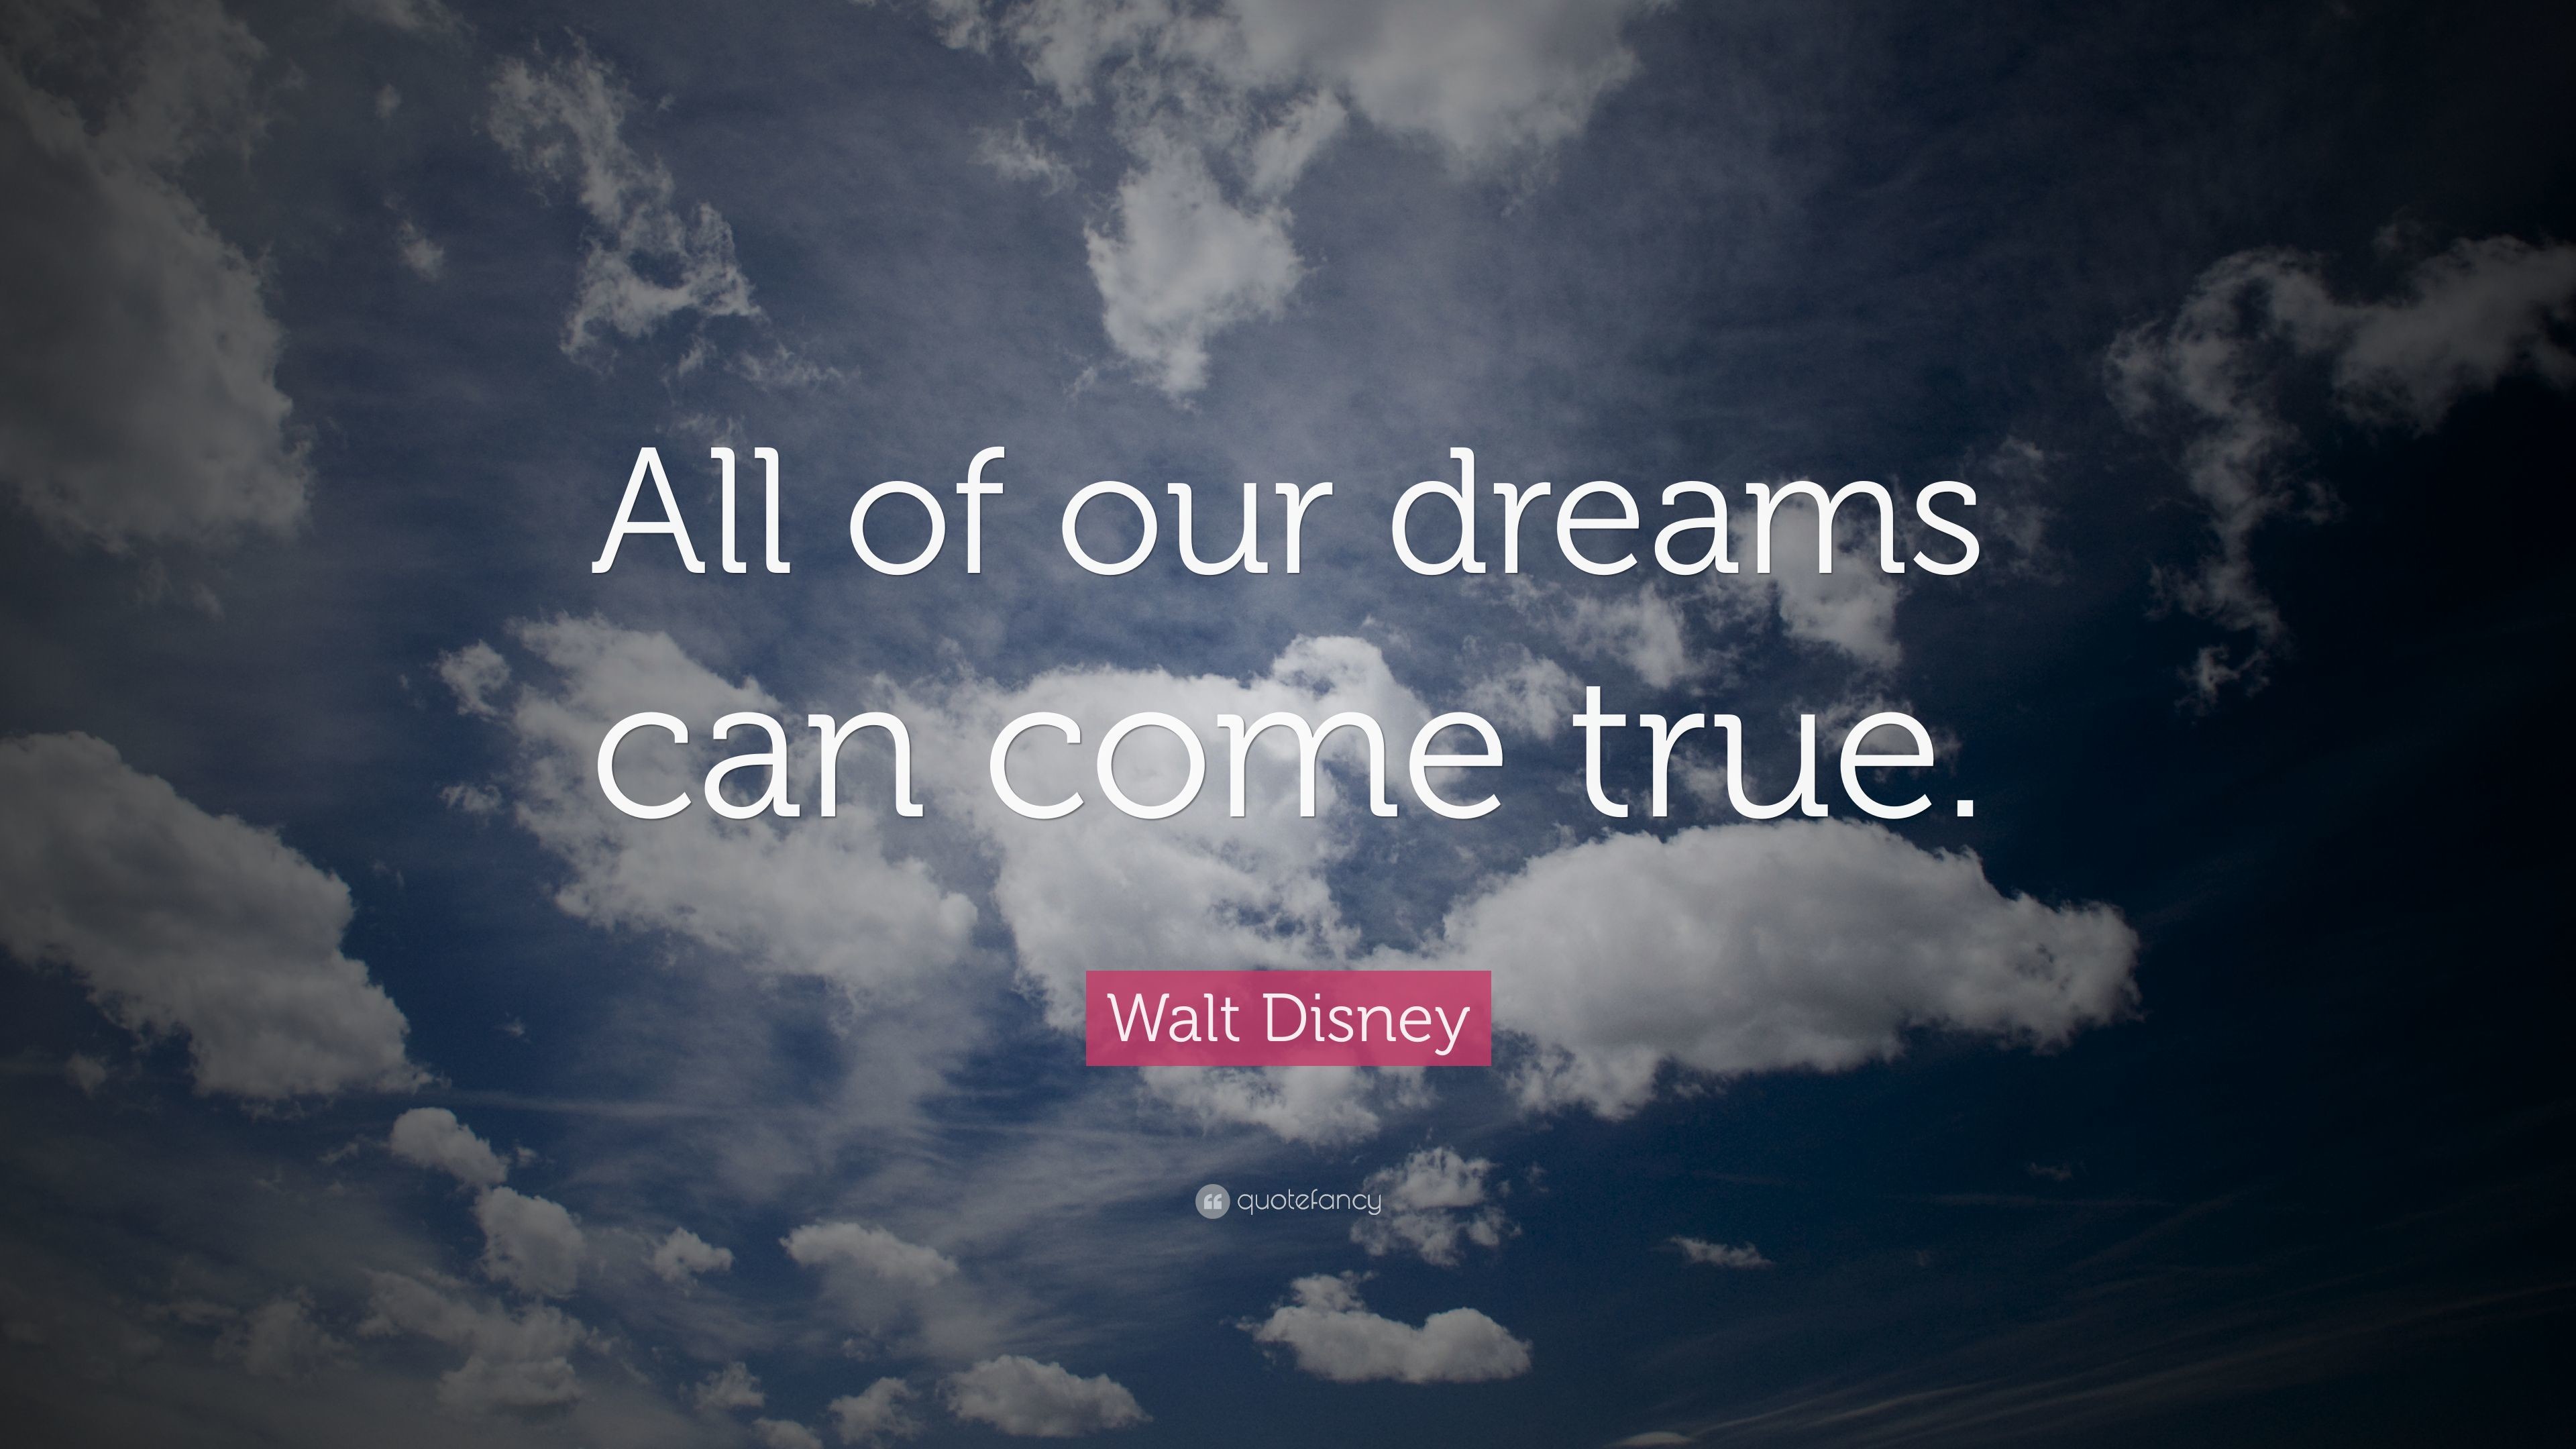 Walt Disney Quote All of our dreams can come true.